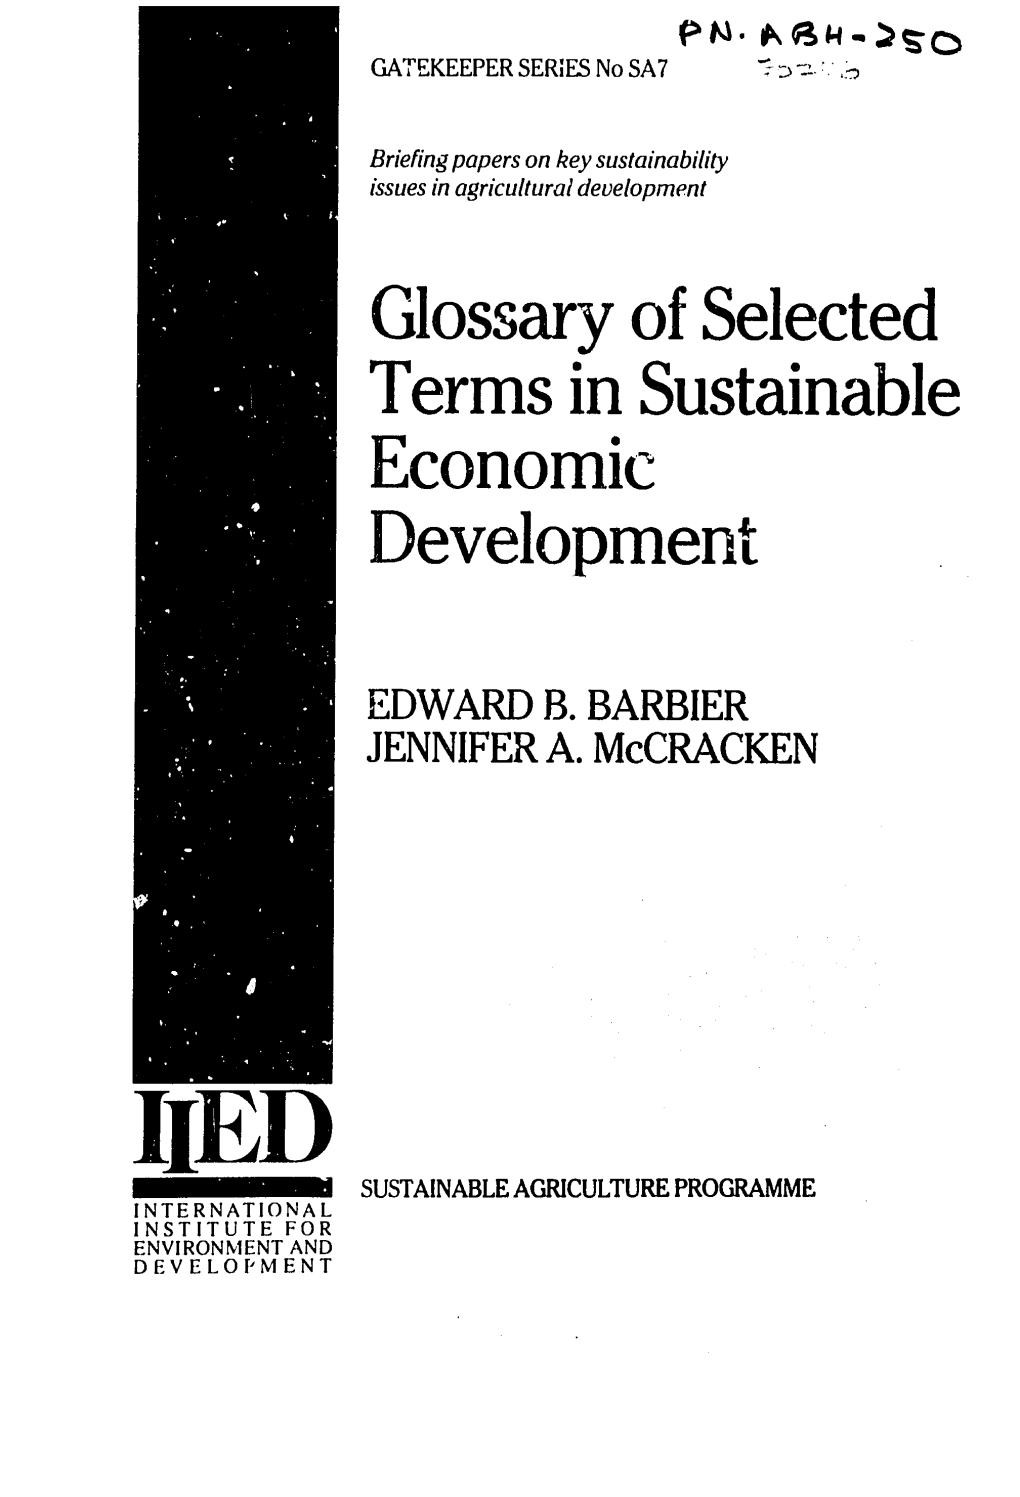 Glossary of Selected Terms in Sustainable Economic Development